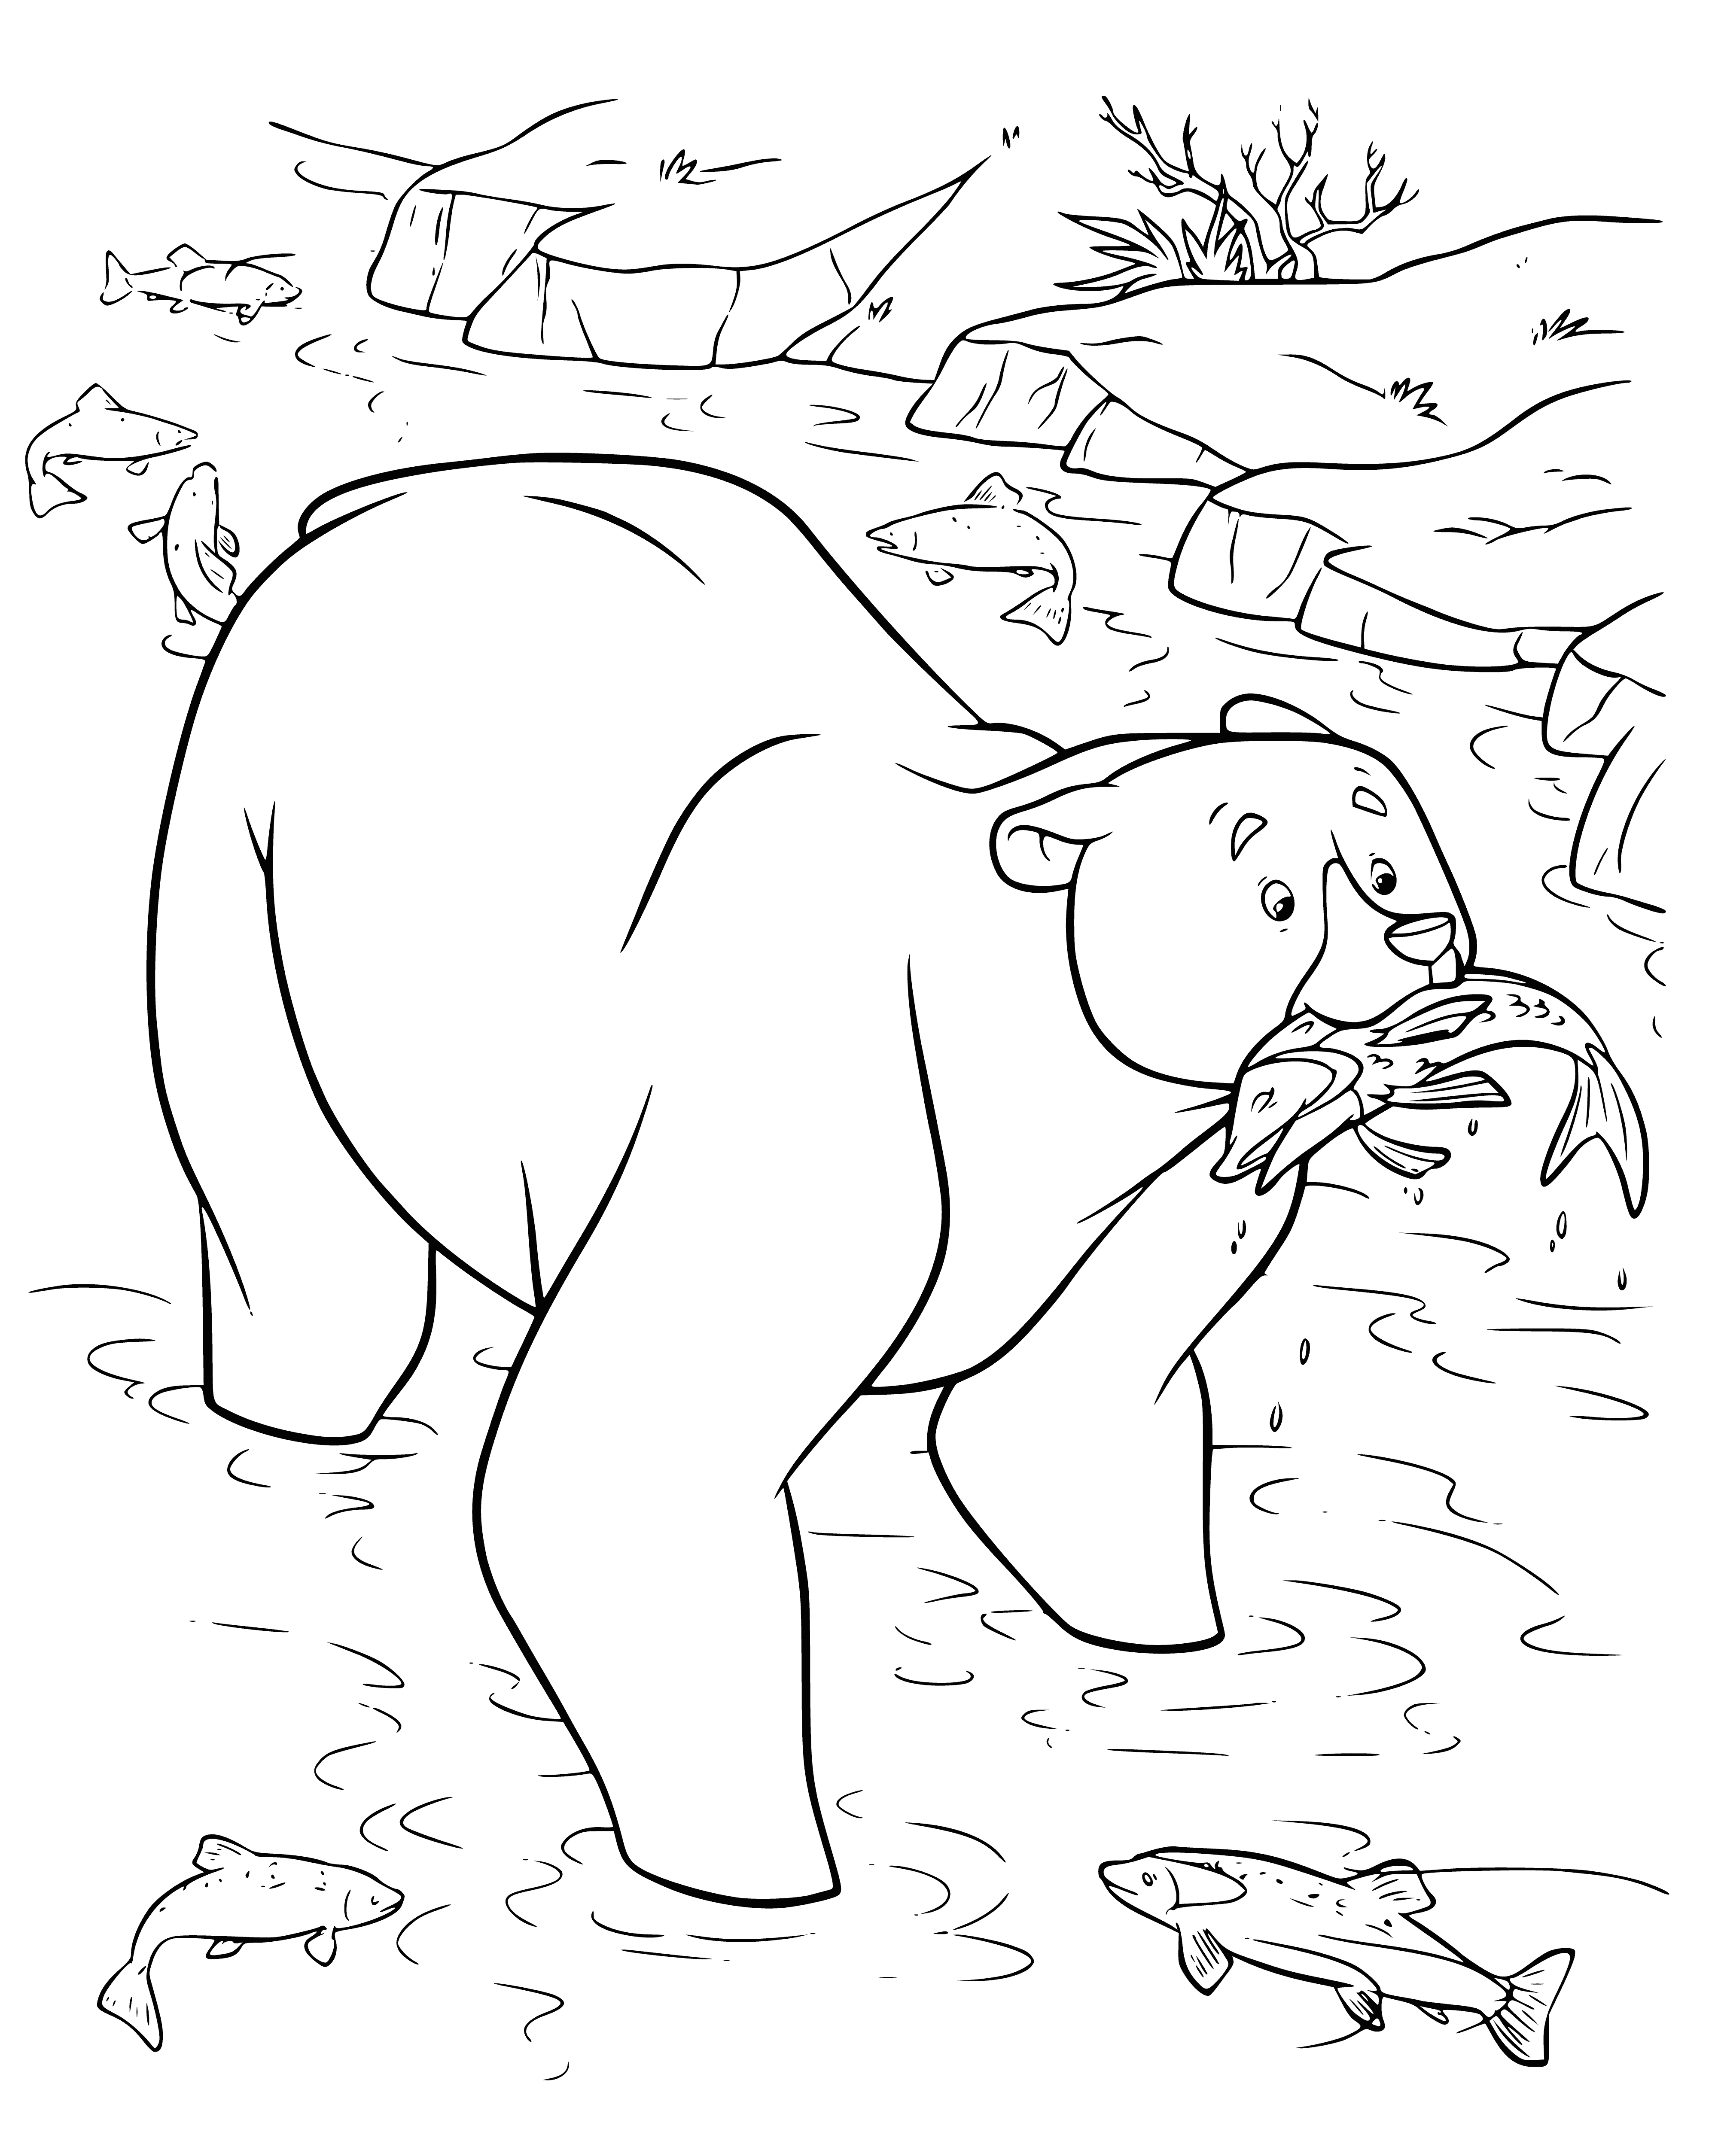 She-bear caught a fish coloring page